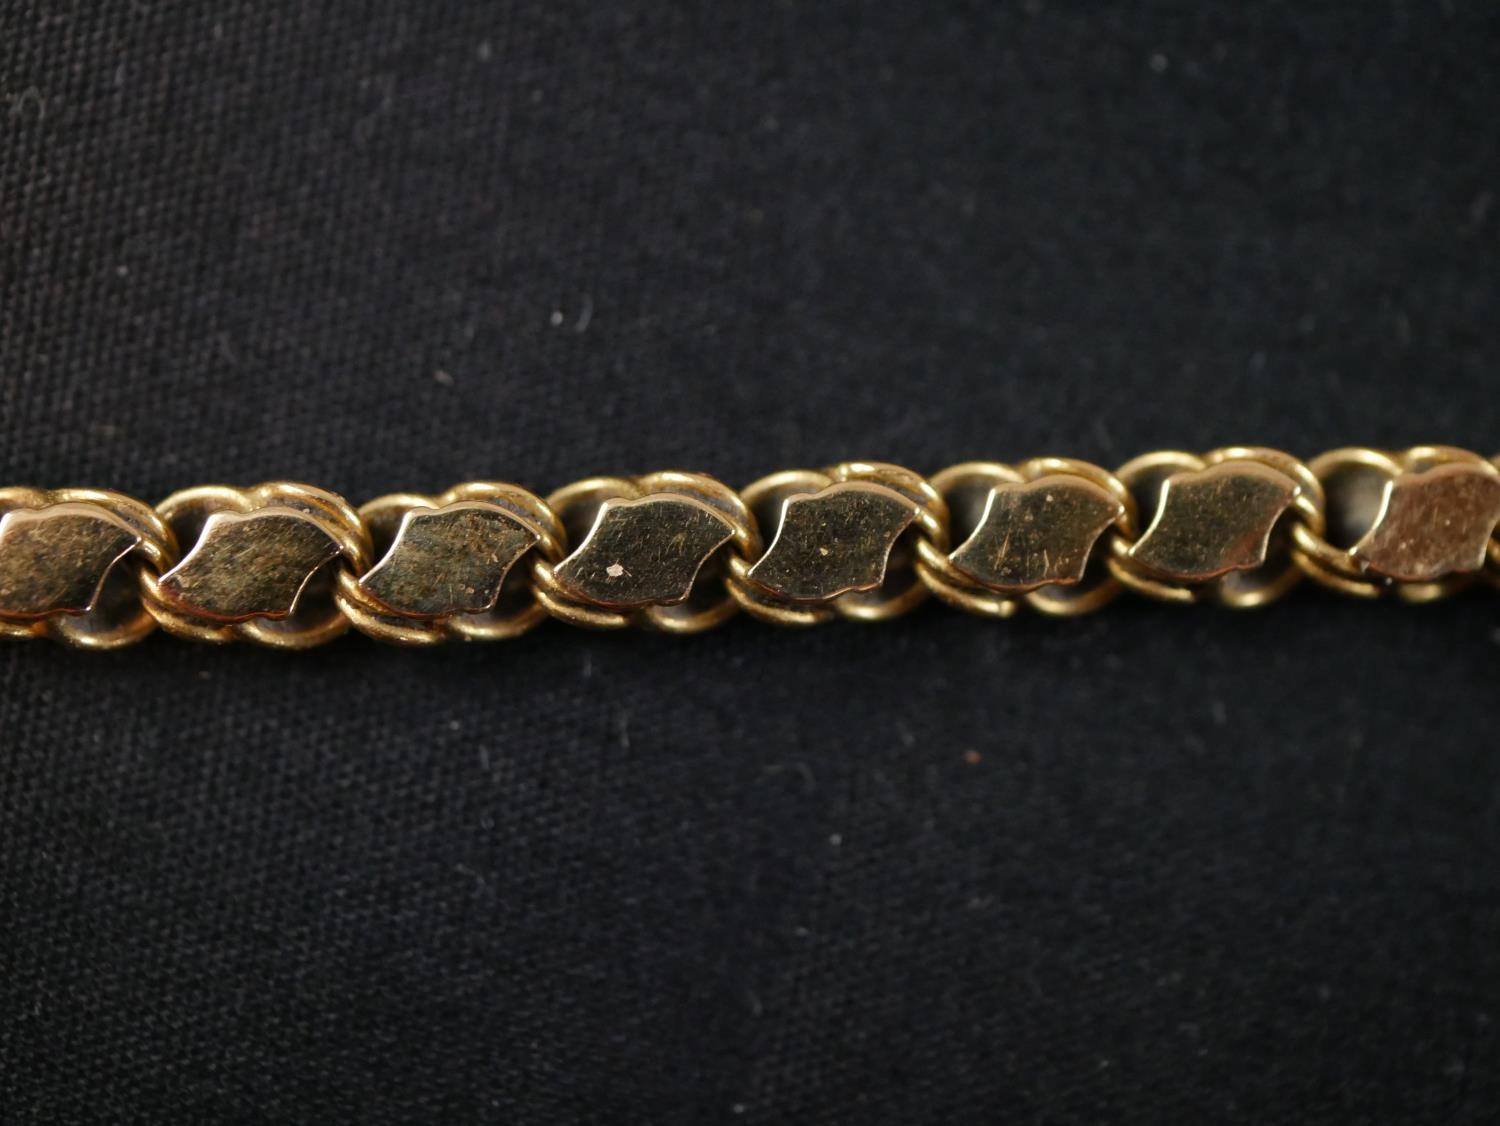 A 16 inch fancy s-link yellow metal (tests as 14ct) chain with a pair of matching earrings. The - Image 4 of 8